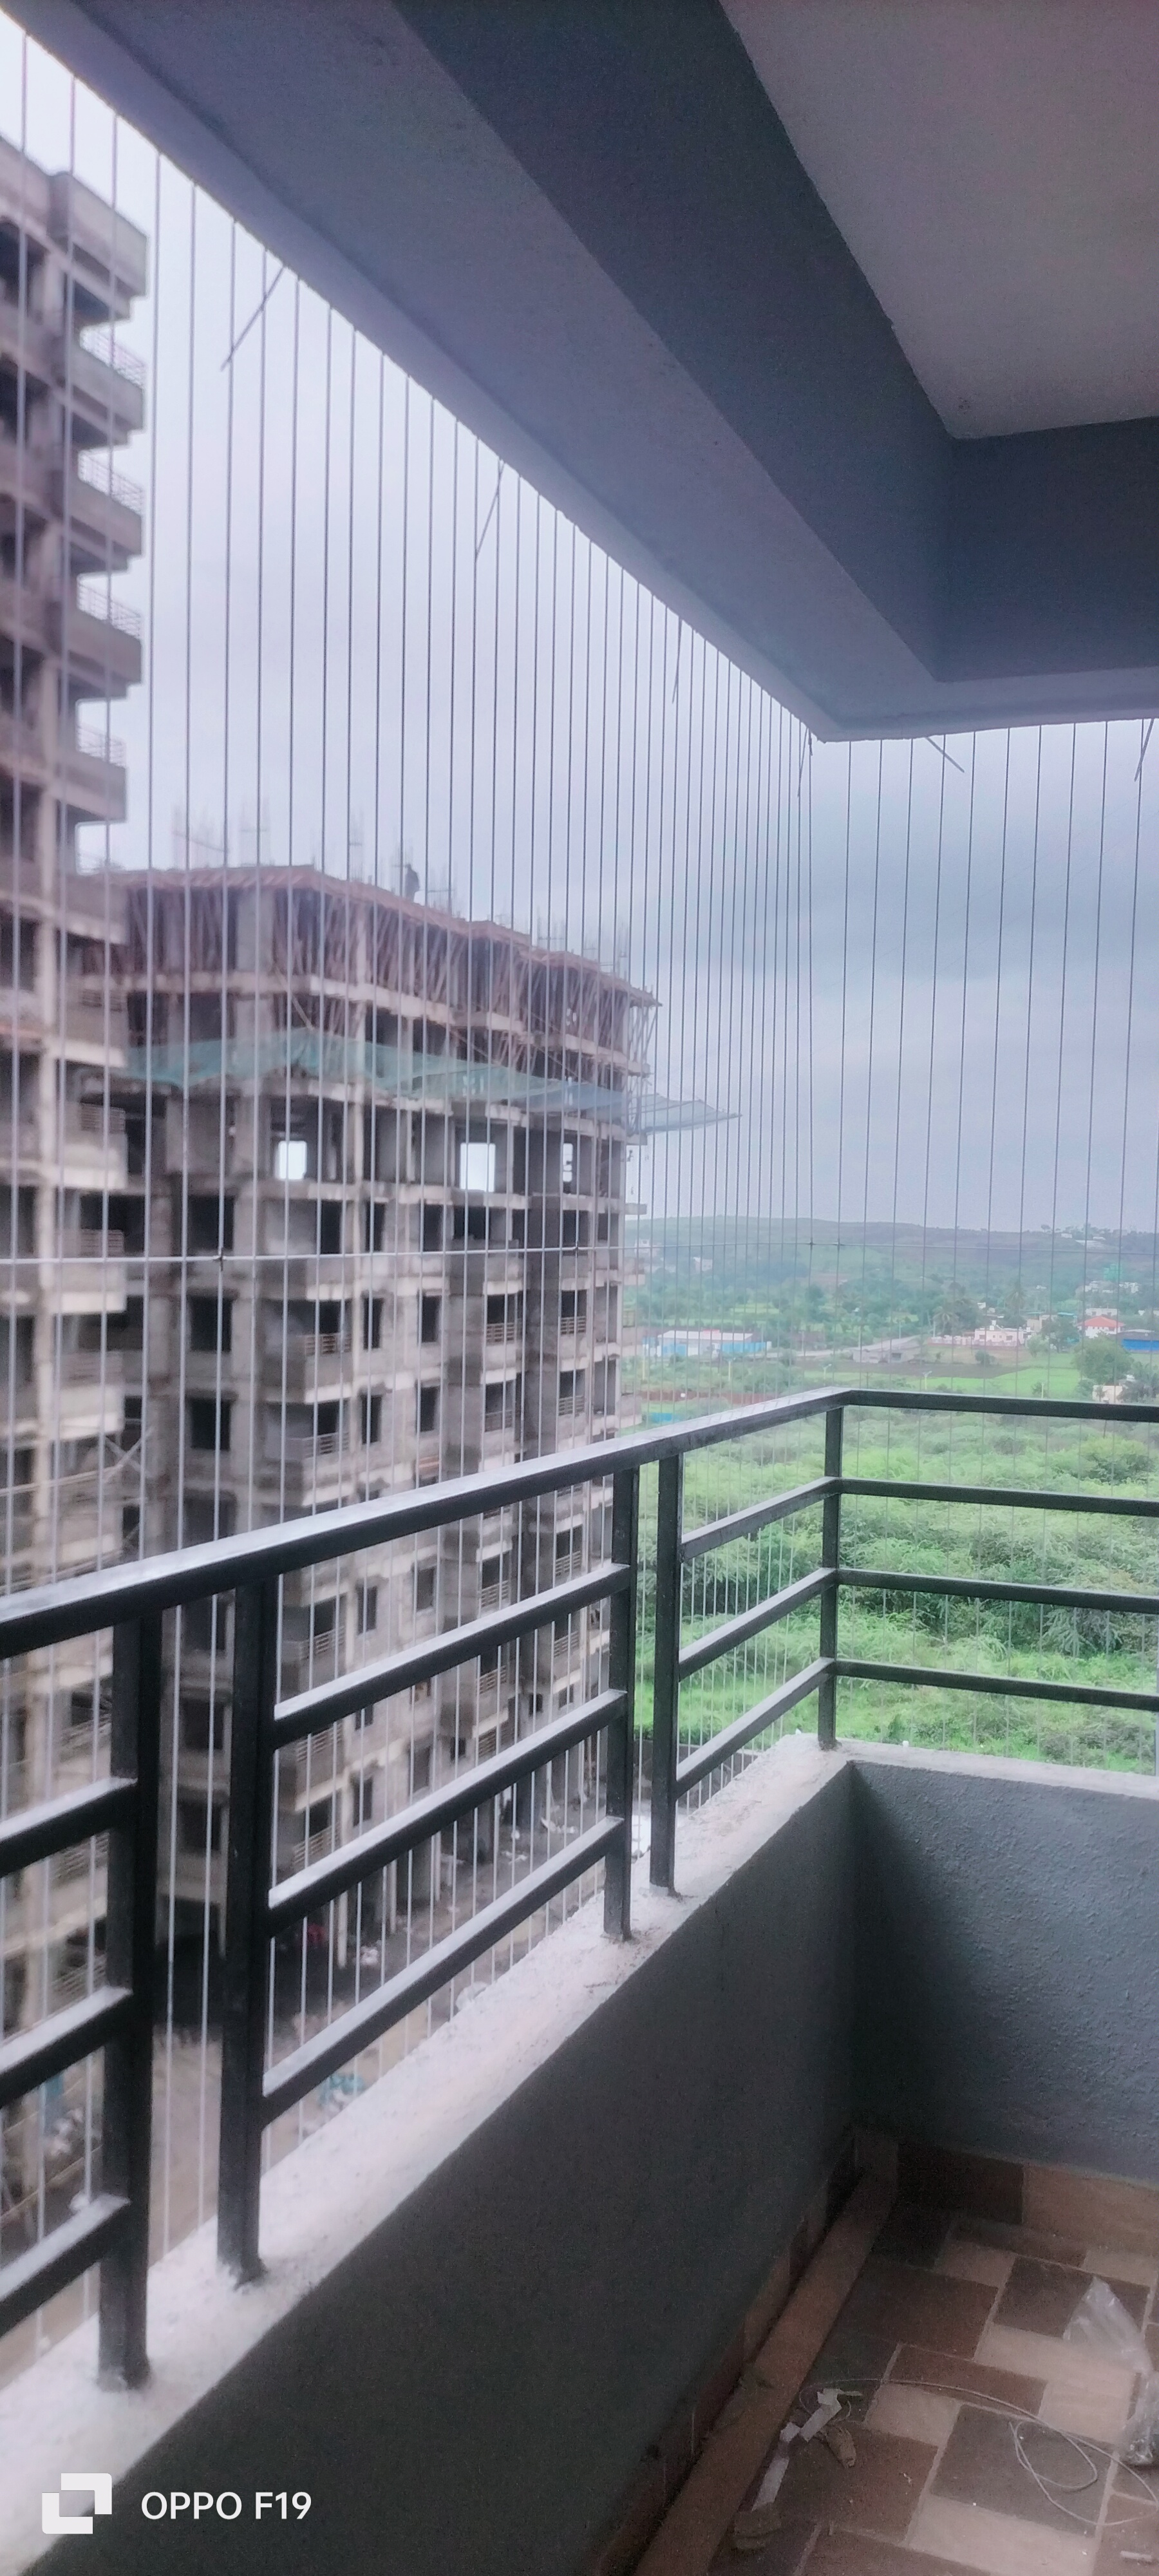 INVISIBLE CHILD SAFETY GRILL INSTALLATION IN HIGH-RISE BUILDINGS | Chirag Bird Netting Services | KHARADI, SAFETY GRILL IN KHARADI, STAINLESS STEEL GRILL IN KHARADI, INVISIBLE SAFETY GRILL IN KHARADI, PUNE, VIRAL, SAFETY.  - GL114381